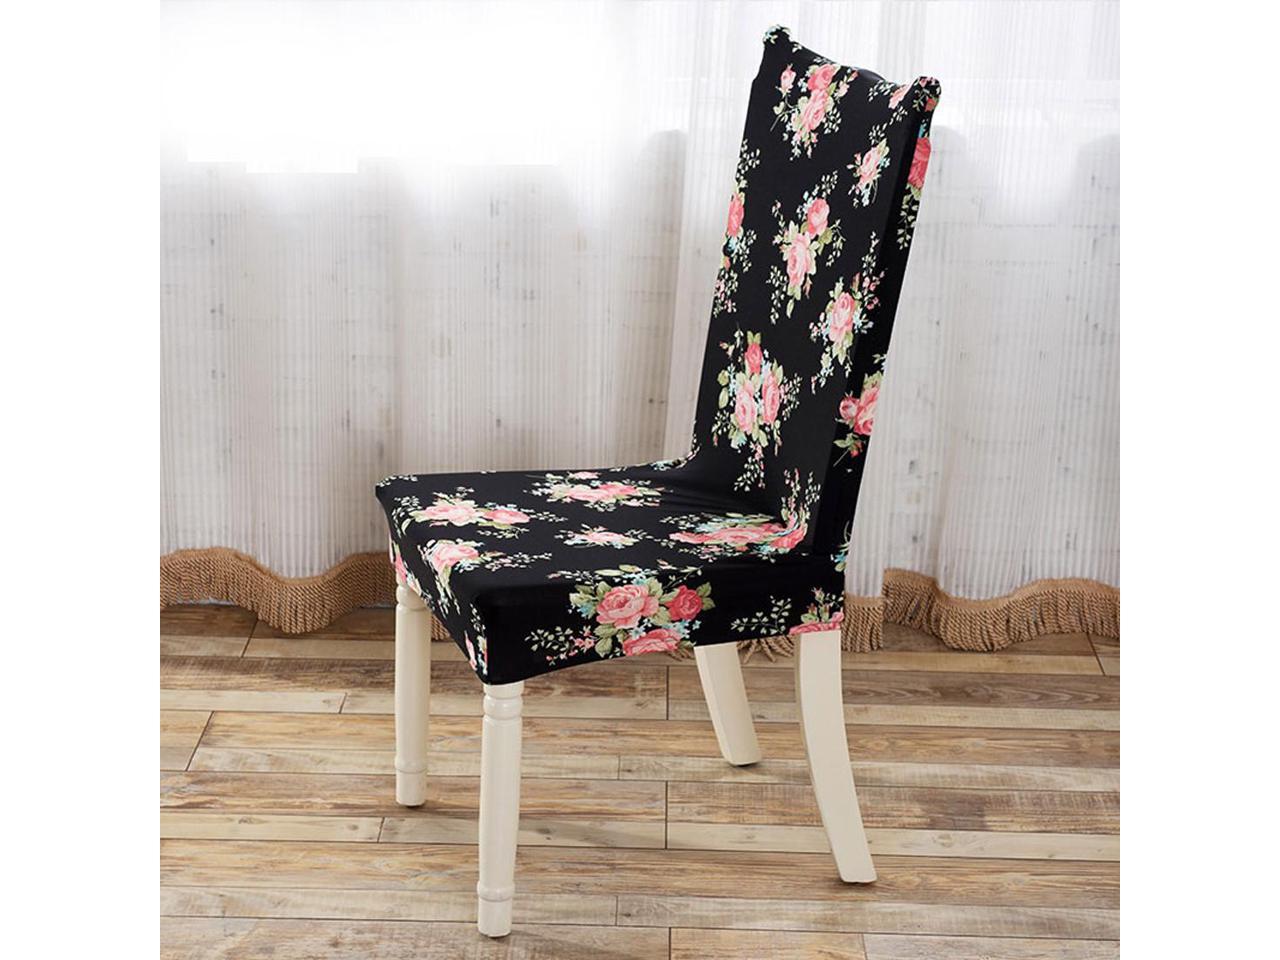 Household Removable Stretch Elastic Slipcovers Dining Room Stool Chair Seat Covers Newegg Com